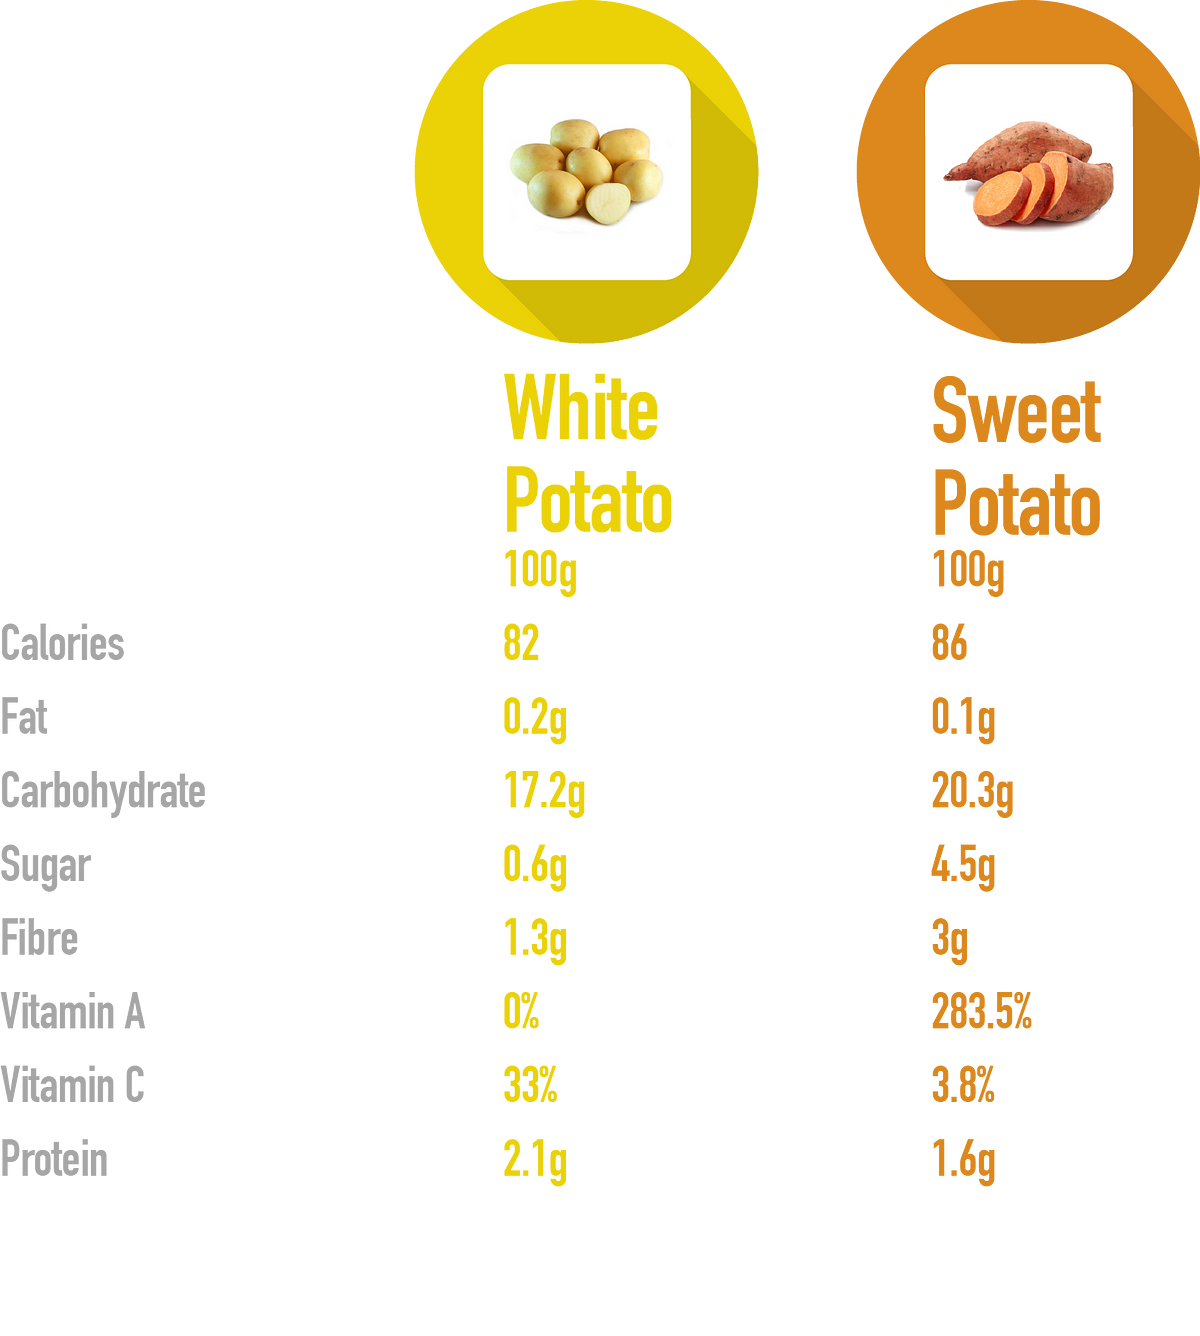 White potatoes Nutrition Facts - Eat This Much